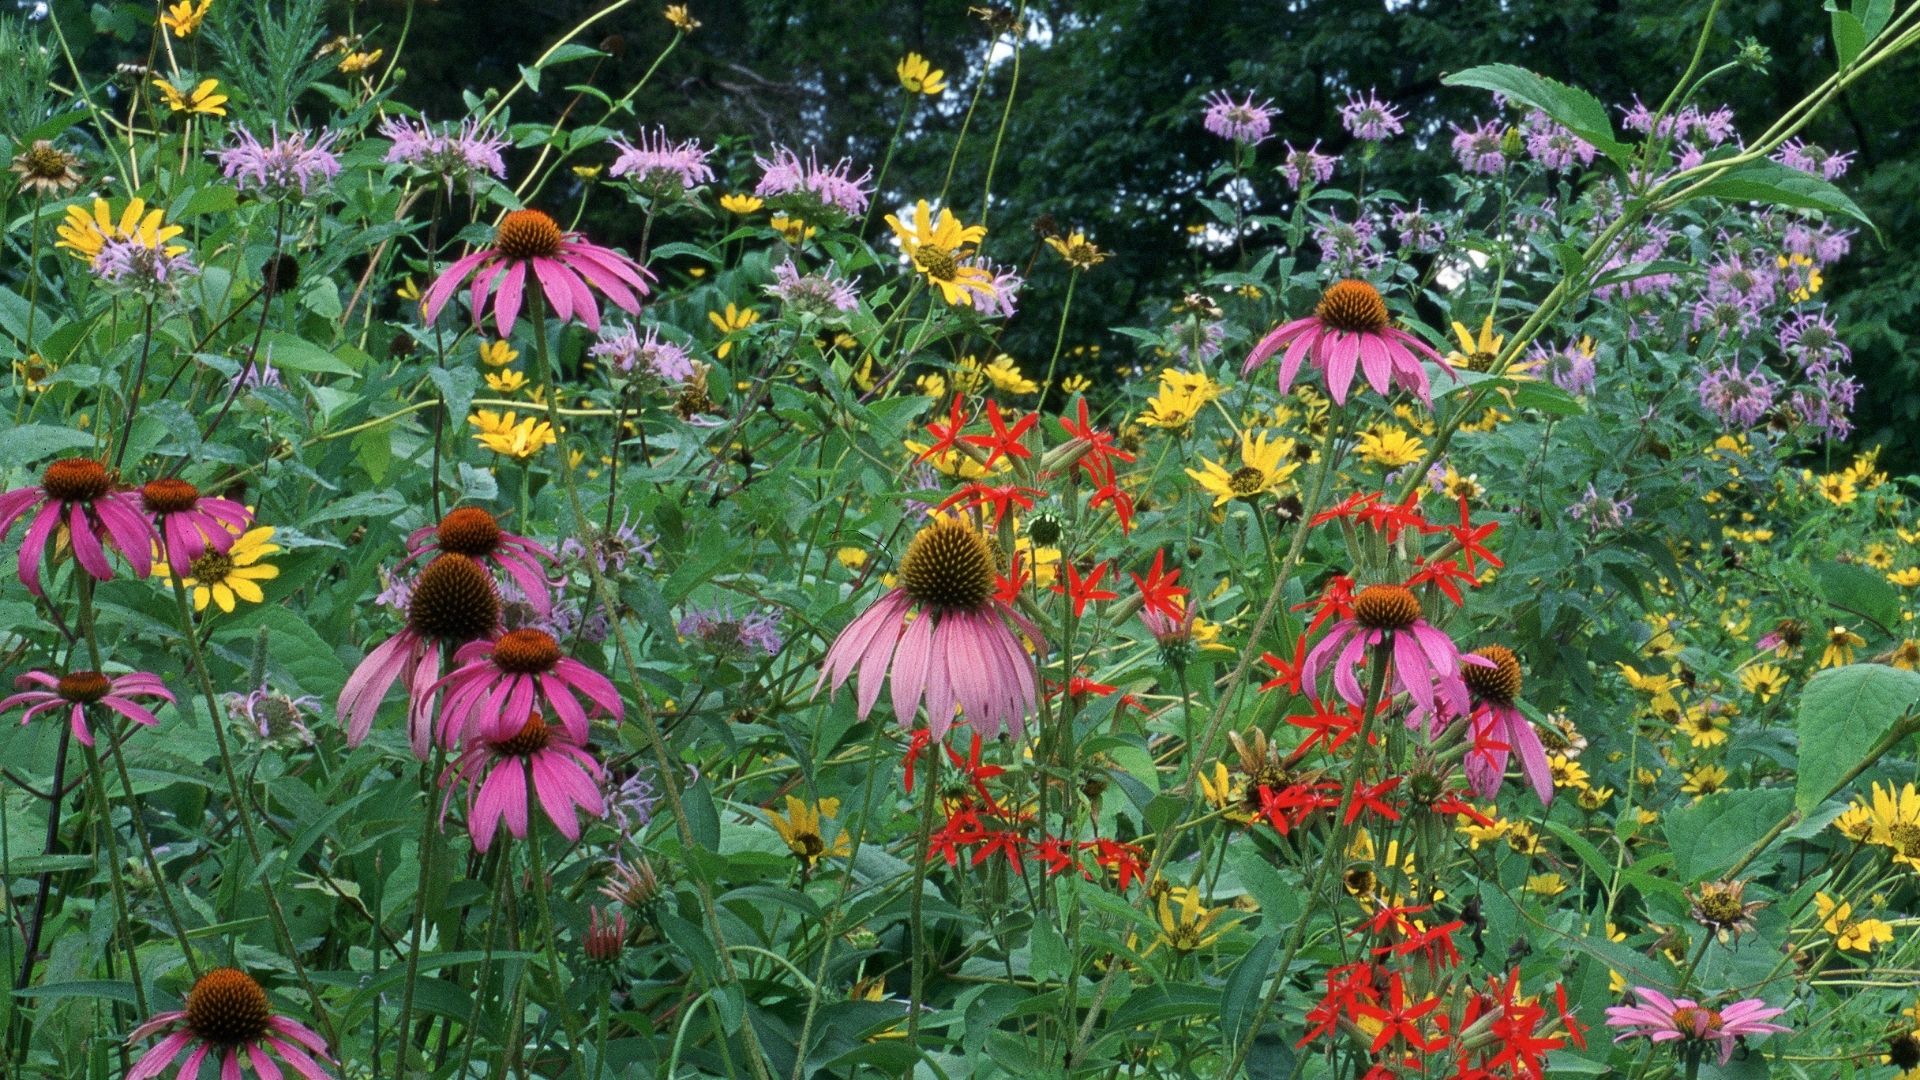 A green, lush wildflower planting with purple coneflowers, bright yellow composite flowers, purple round bee balm flowers, and red cardinal flowers.